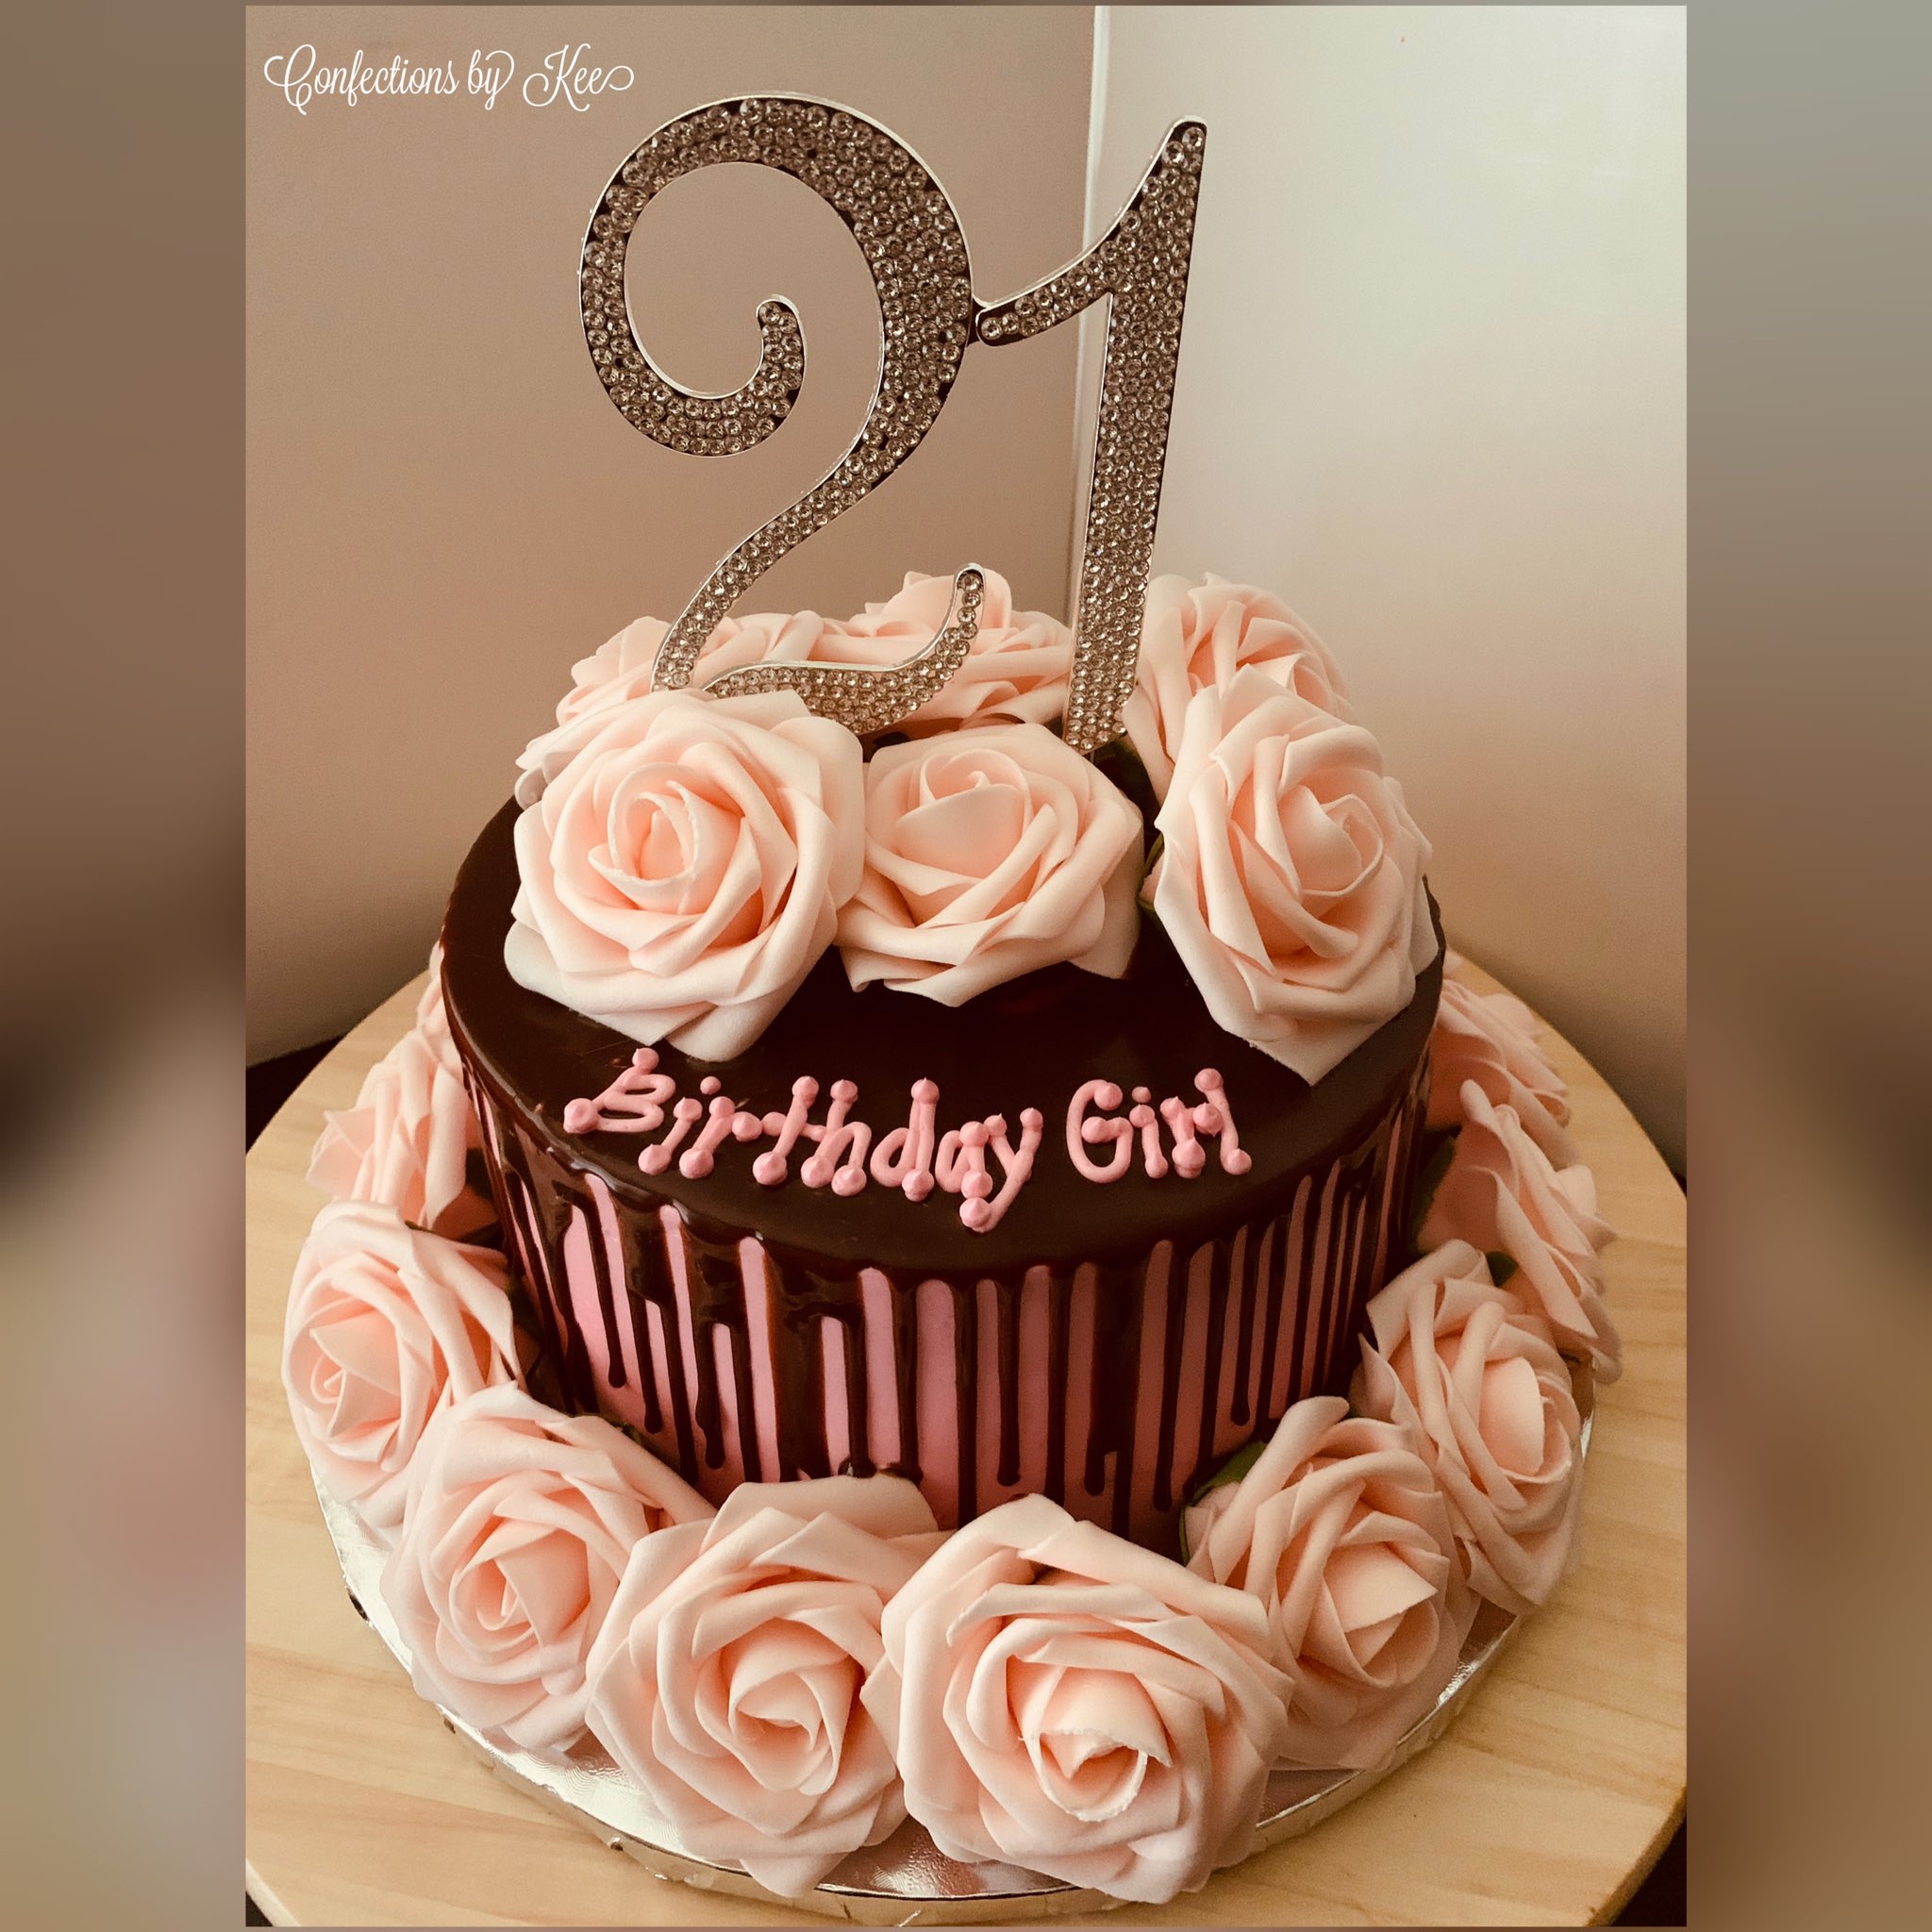 X \ Confections by Kee على X: "21st Birthday Cake for the Birthday Girl • This Custom Birthday Cake is Vanilla Flavored with Pink Vanilla Buttercream Frosting, Chocolate Ganache Drip, and